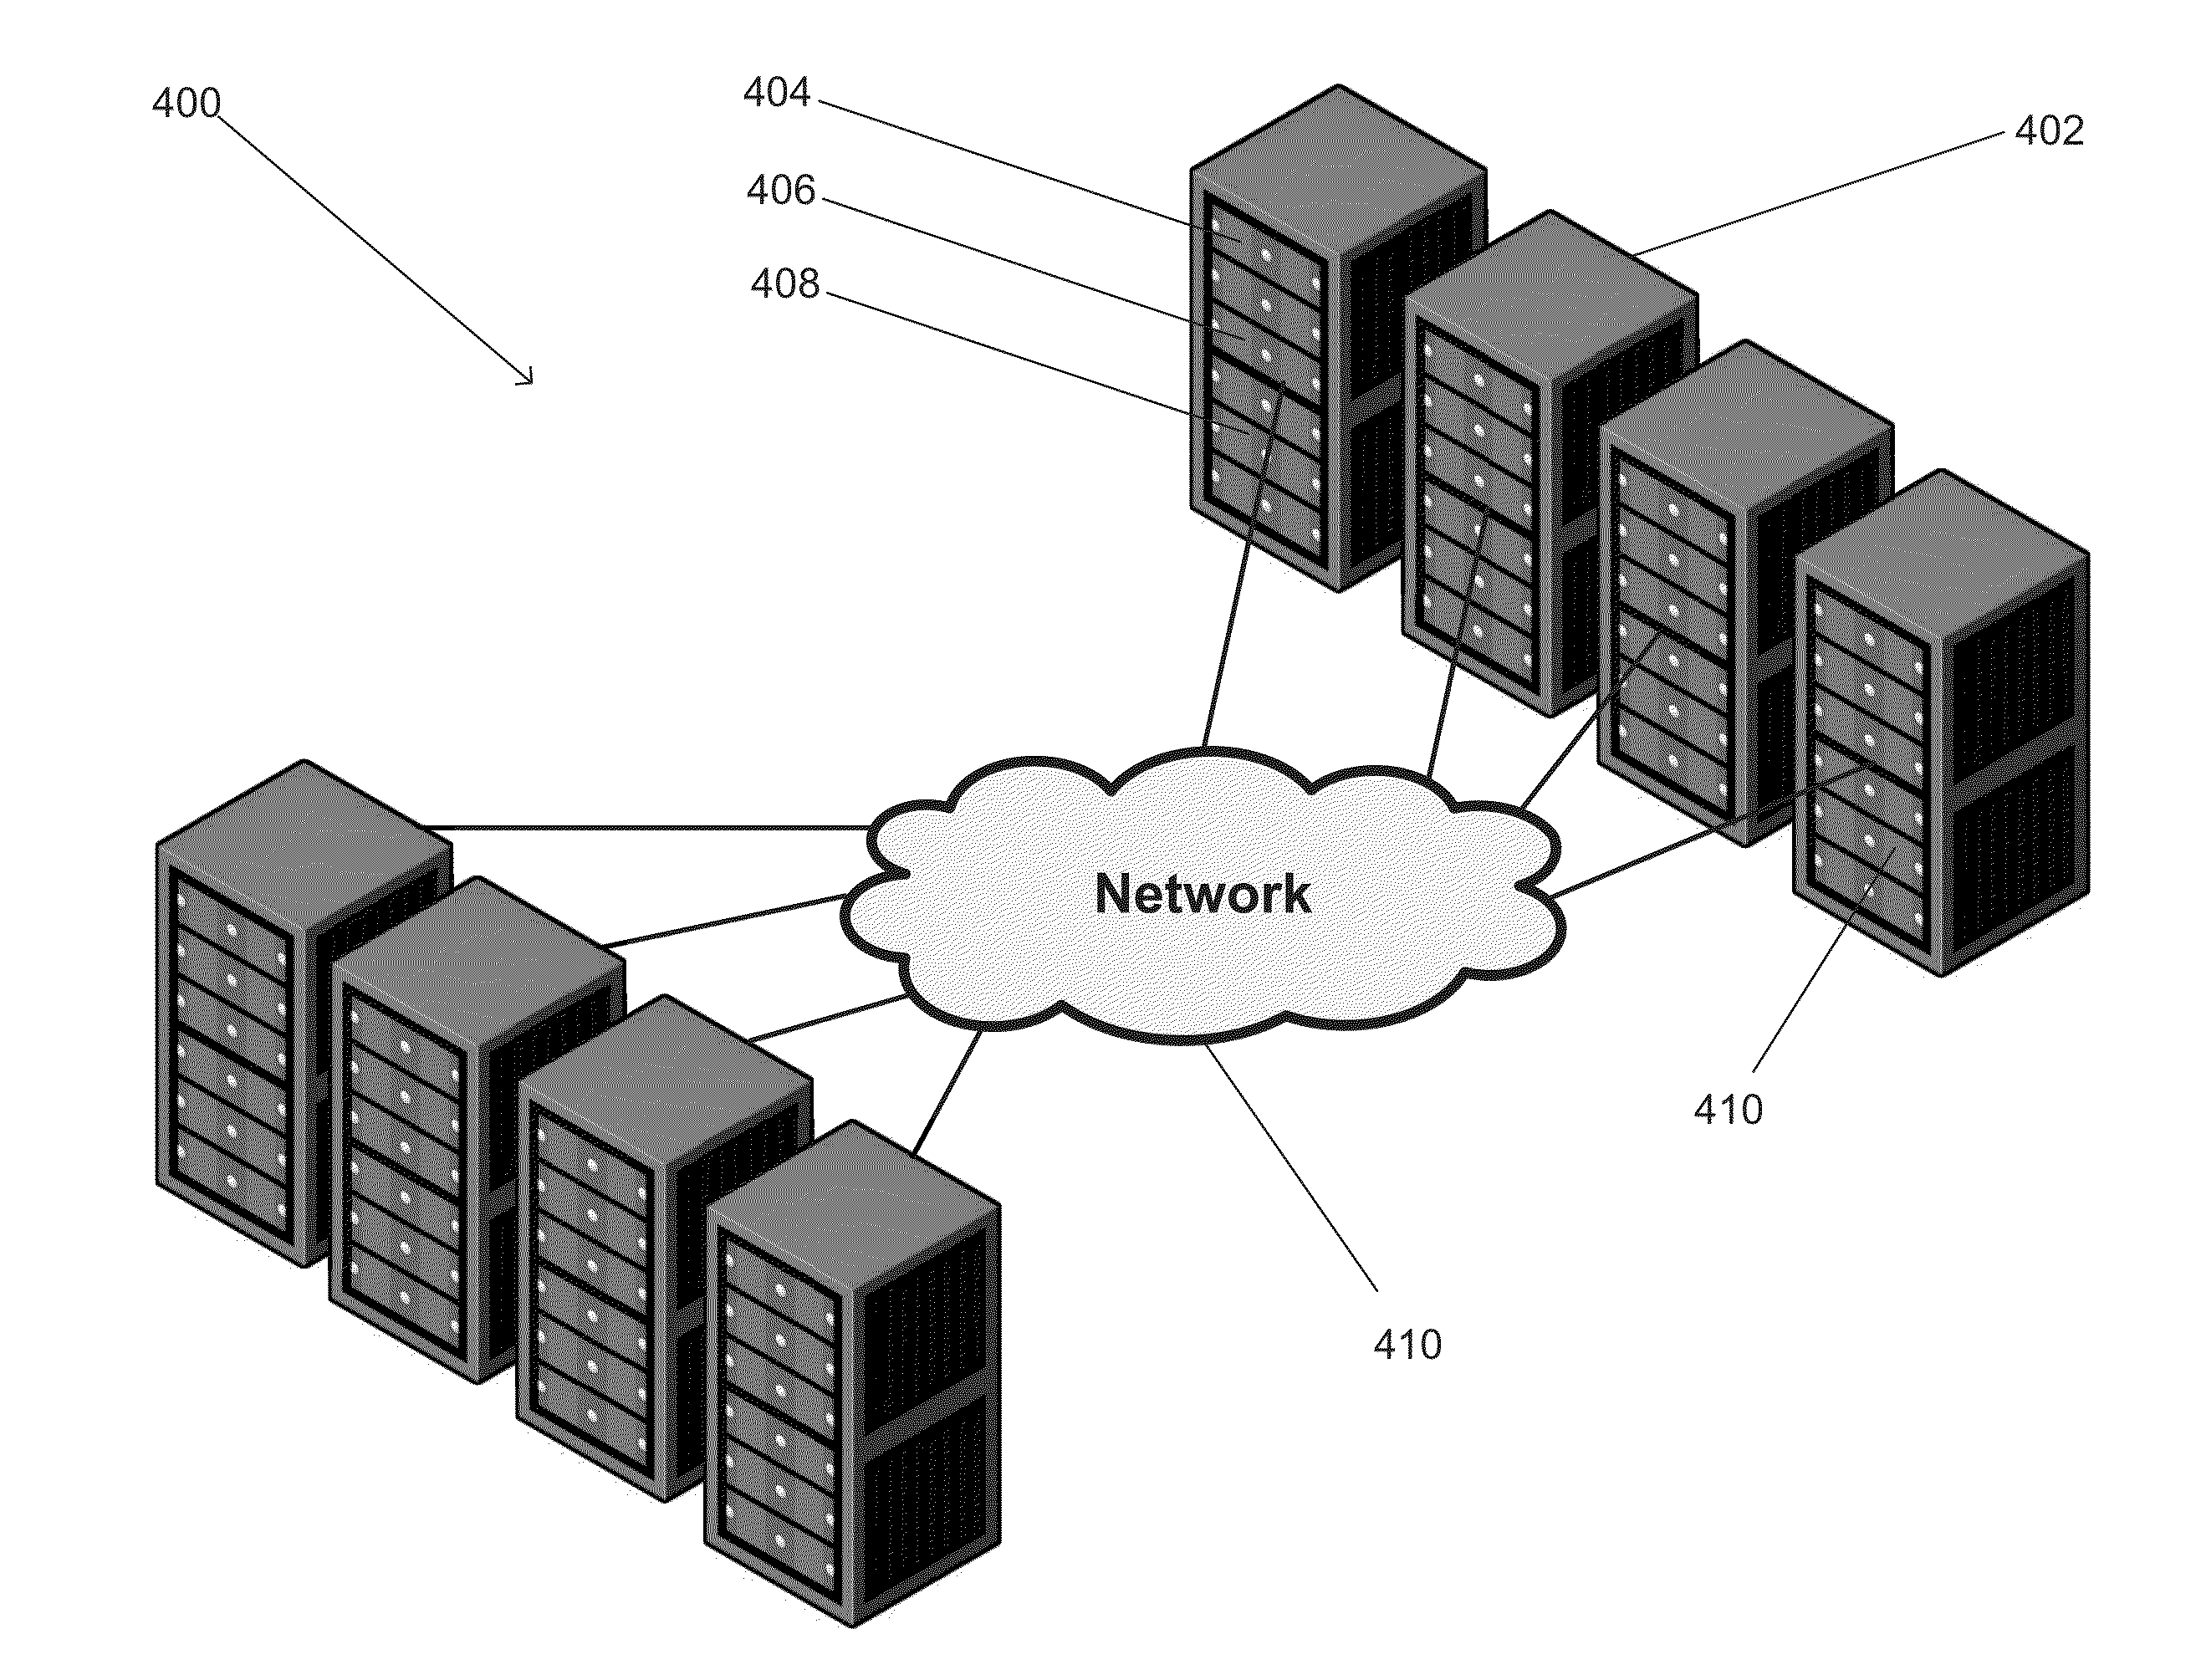 Systems and methods for implementing distributed databases using many-core processors